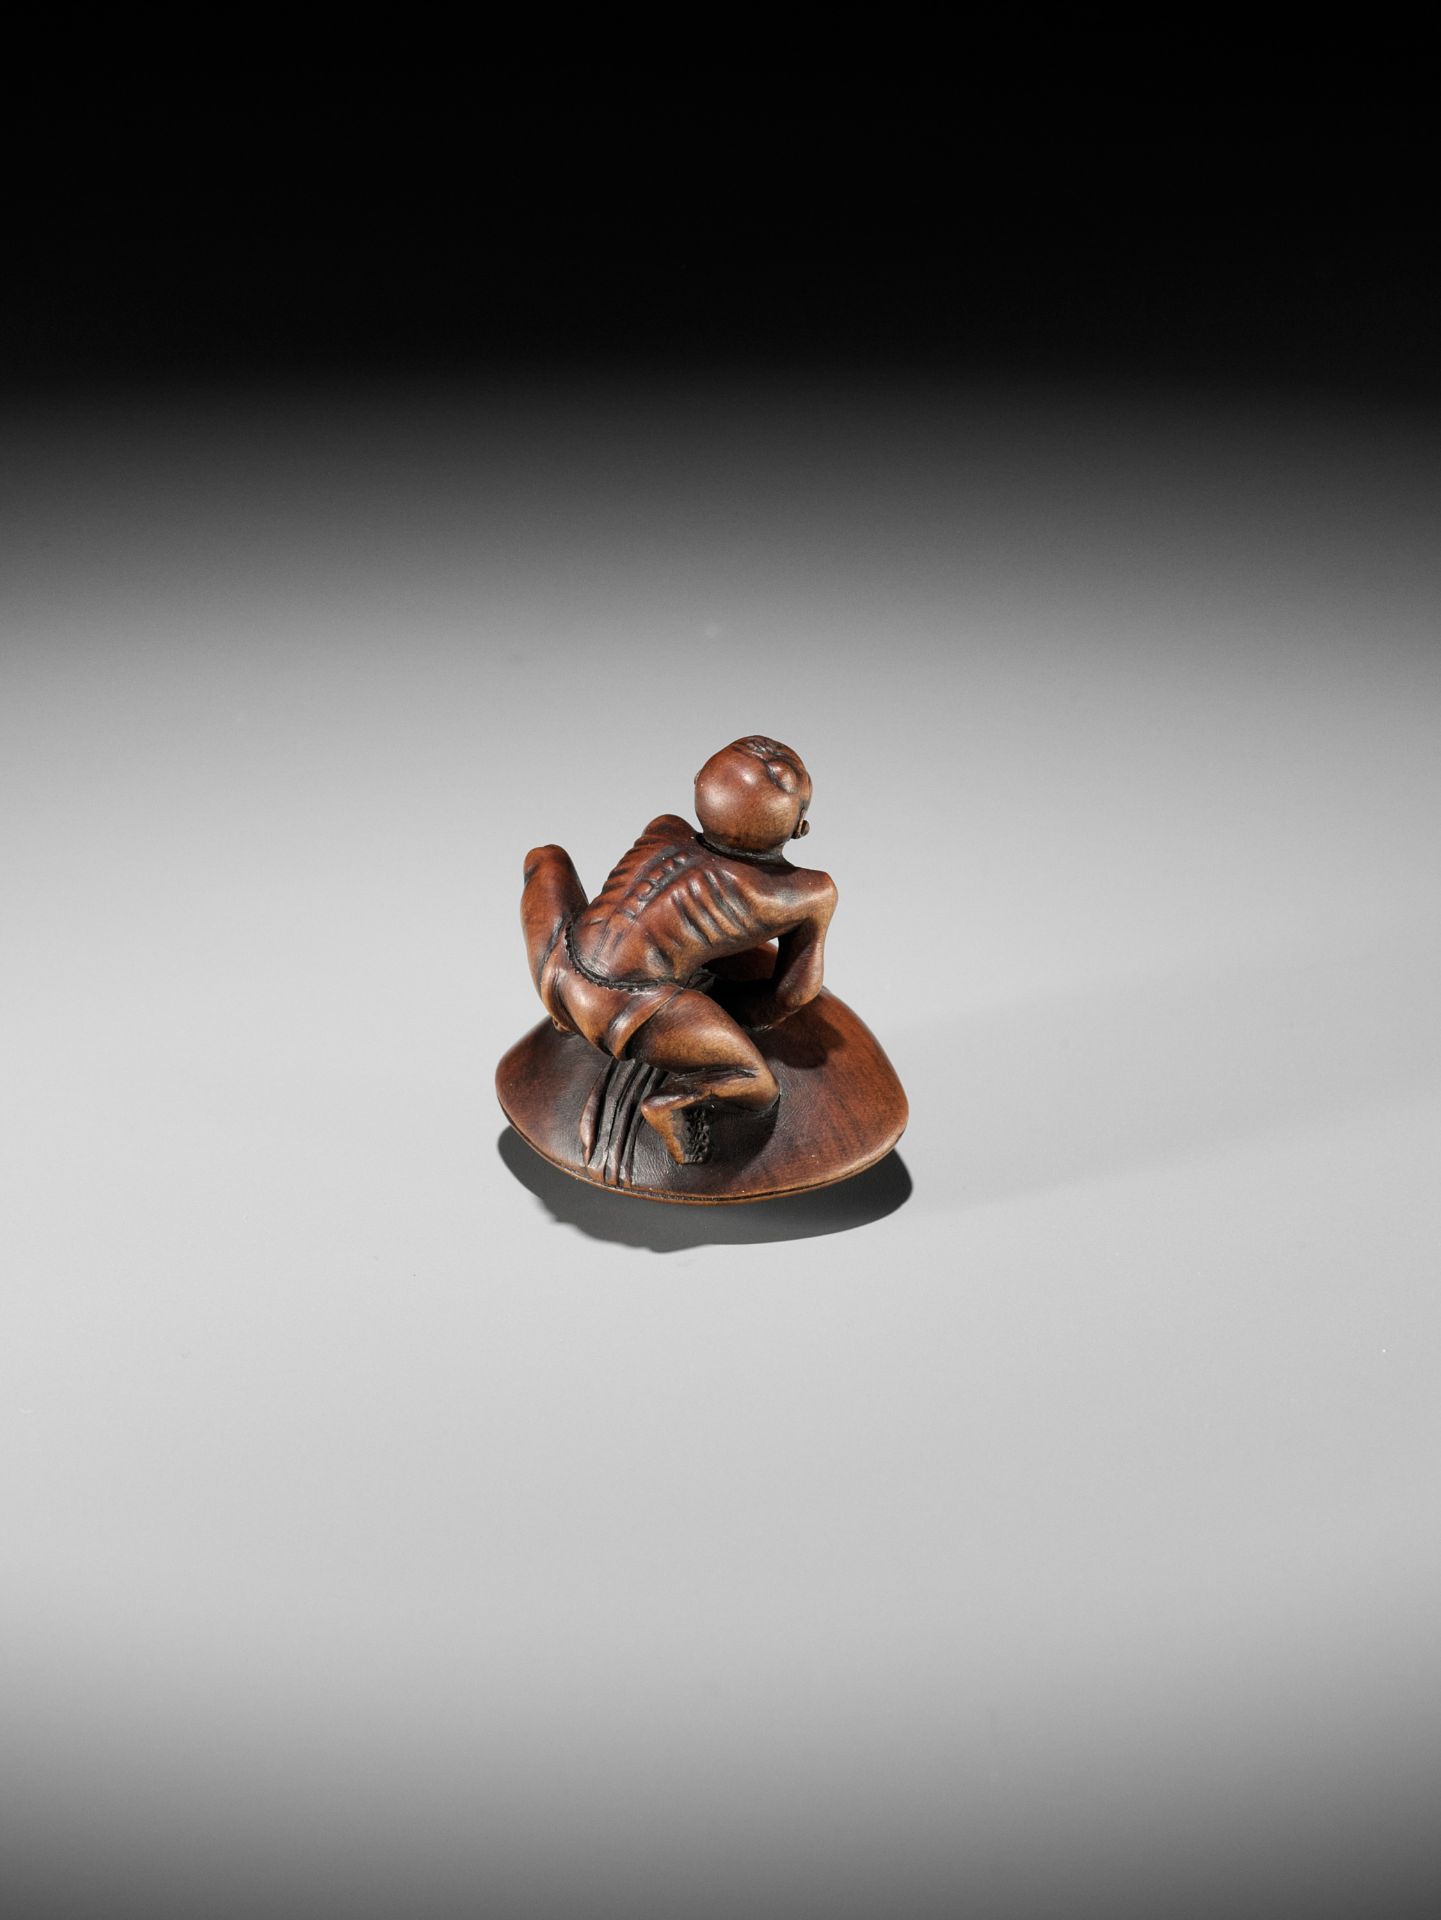 GYOKUZAN: A MASTERFUL MINIATURE WOOD NETSUKE OF A BLINDMAN BEING TRAPPED BY A CLAM - Image 8 of 12